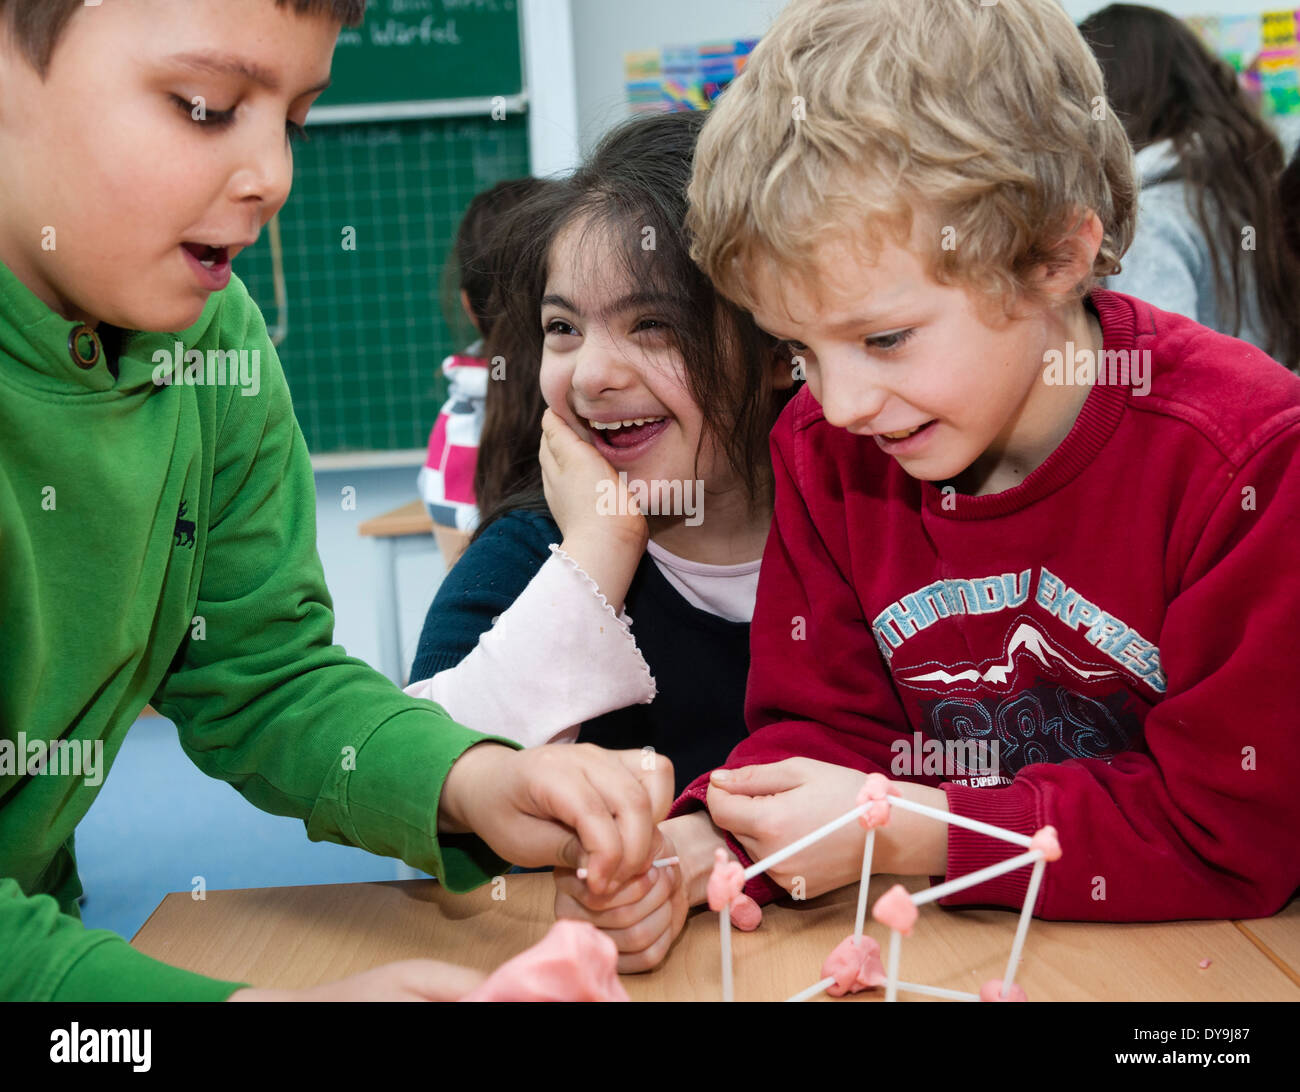 Non-disabled and disabled pupils (in this case a girl suffering from Down's syndrome) learn together in the same classroom. Stock Photo